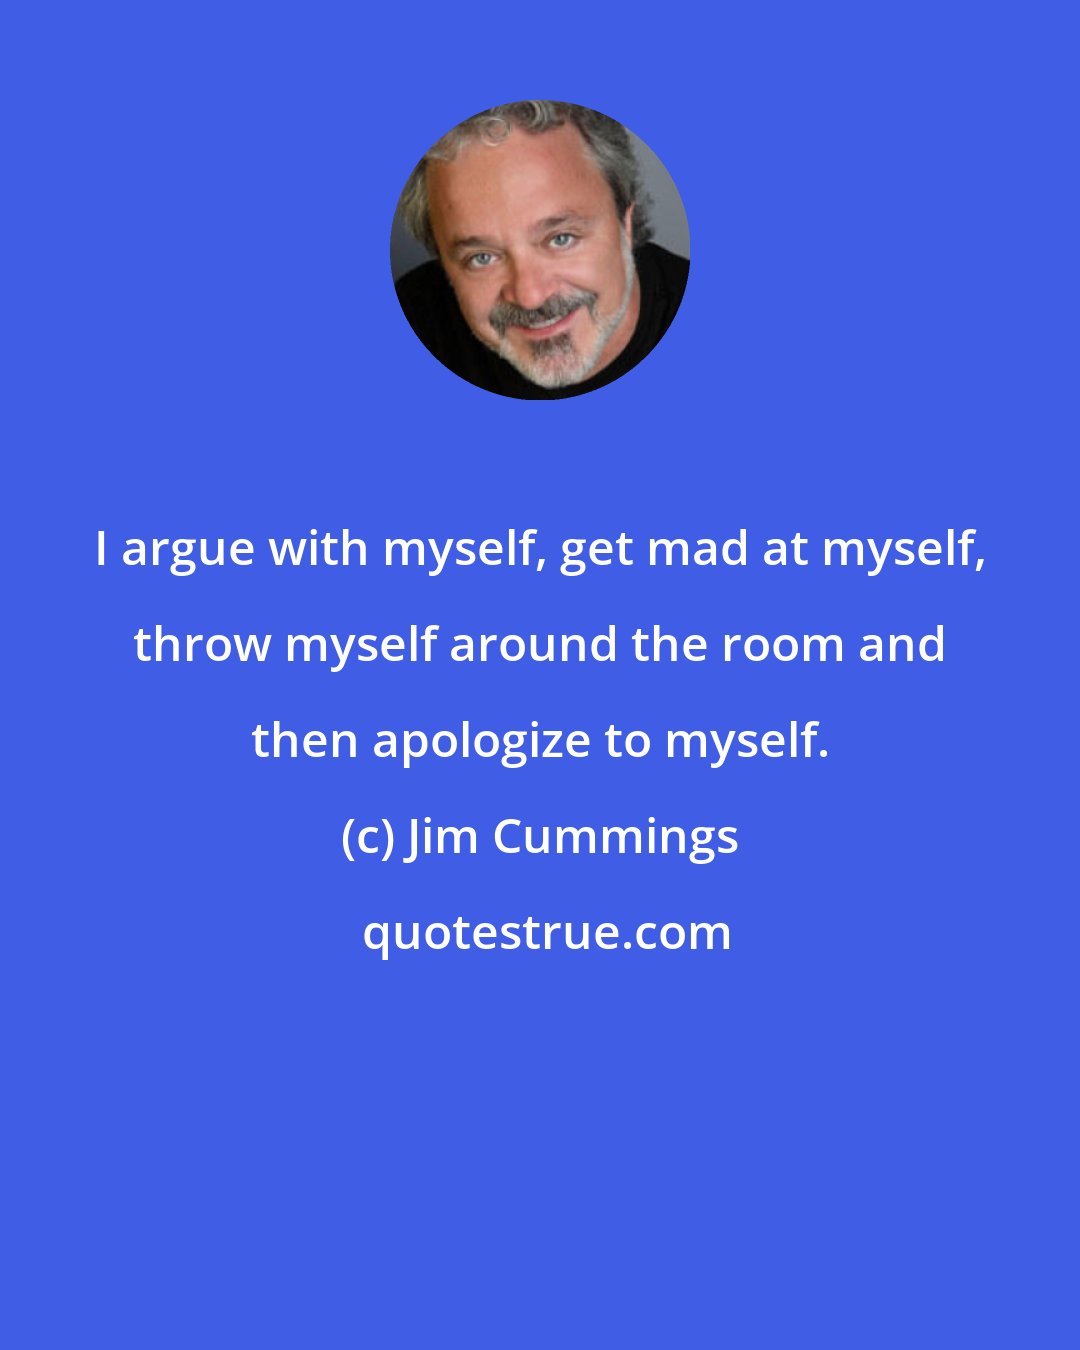 Jim Cummings: I argue with myself, get mad at myself, throw myself around the room and then apologize to myself.